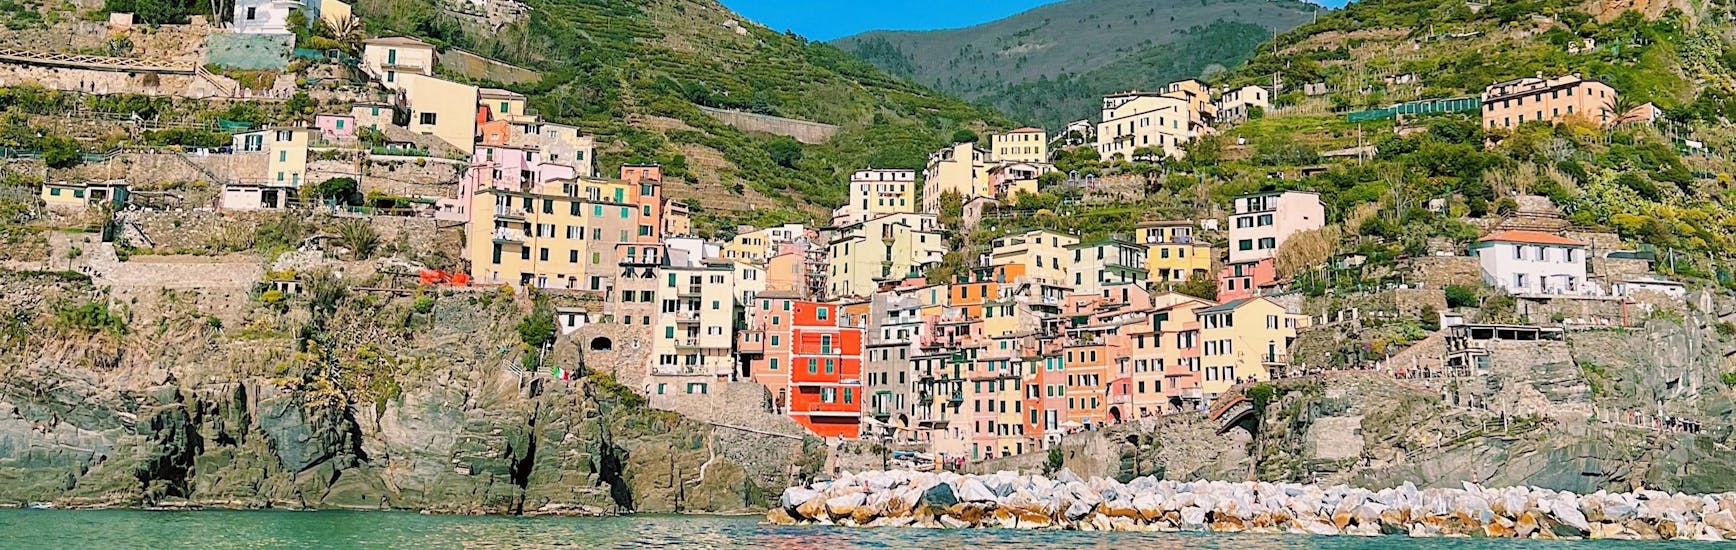 The village of Riomaggiore seen from the sea during the sailing boat trip from La Spezia to Cinque Terre with Lunch with Velagiovane.